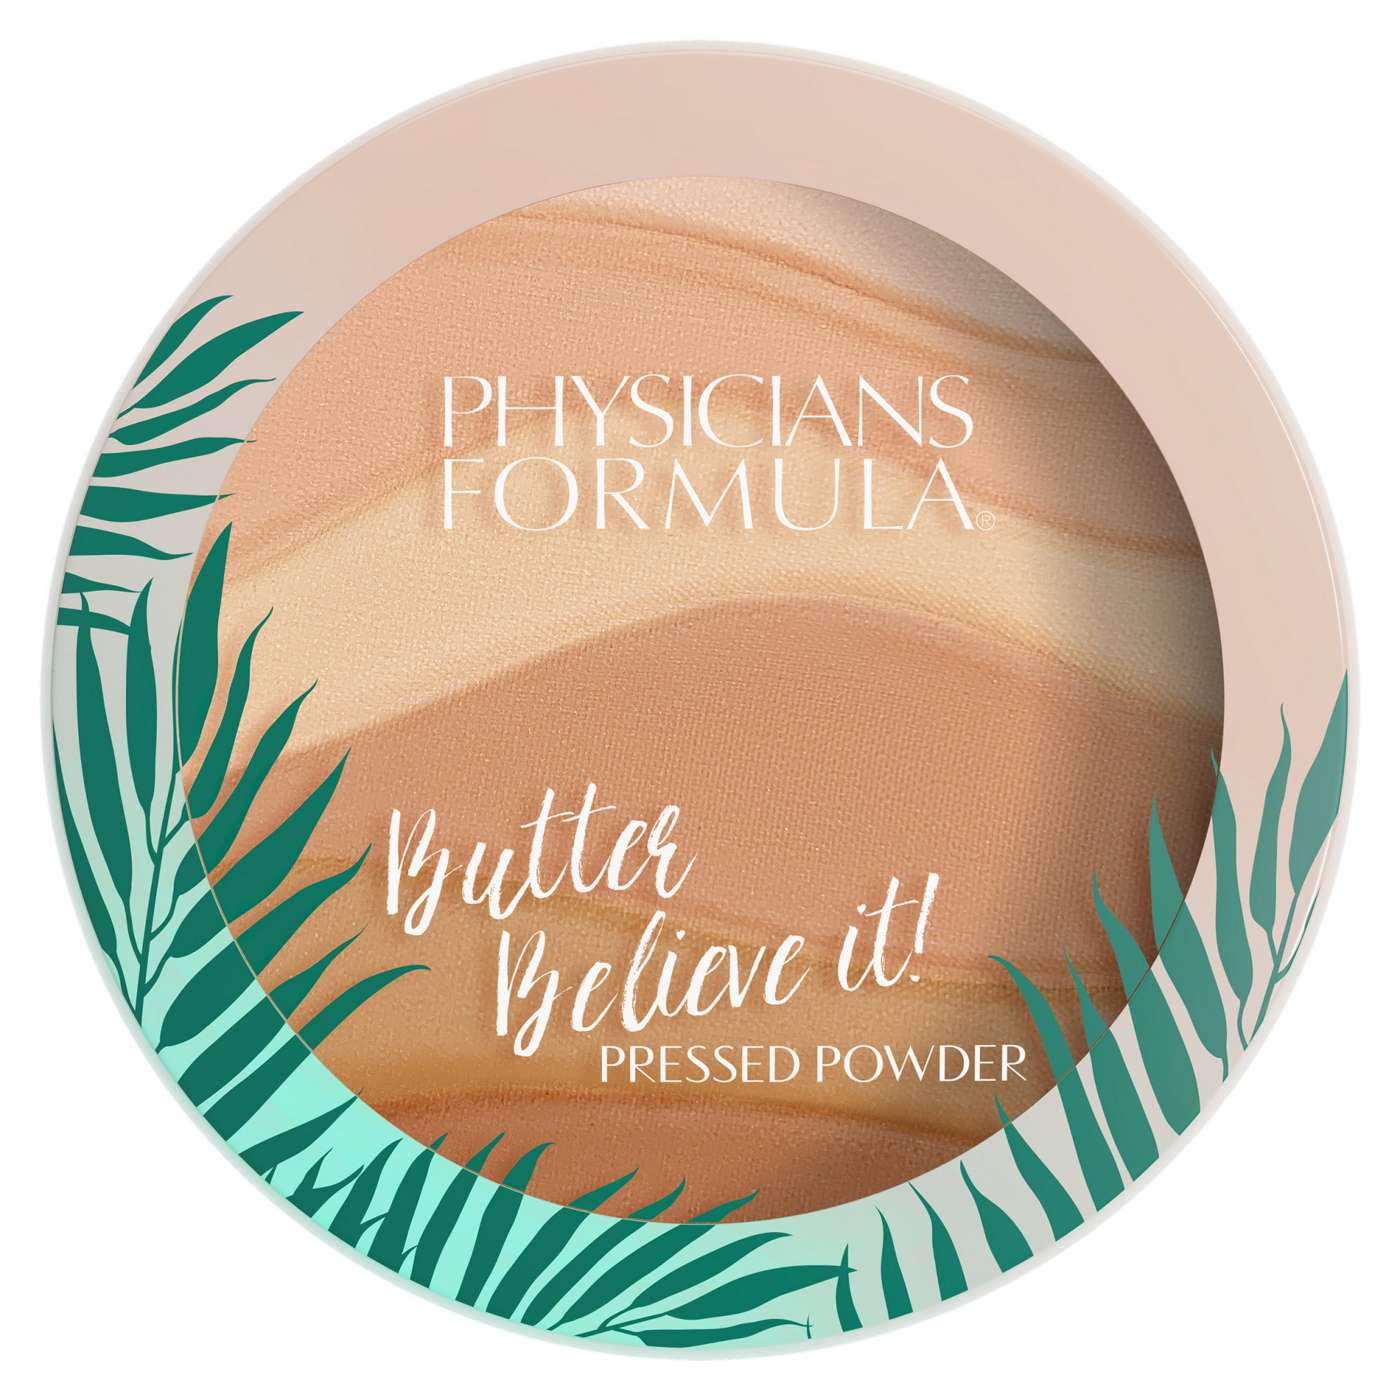 Physicians Formula Butter Believe It! Pressed Powder Creamy Natural; image 3 of 5